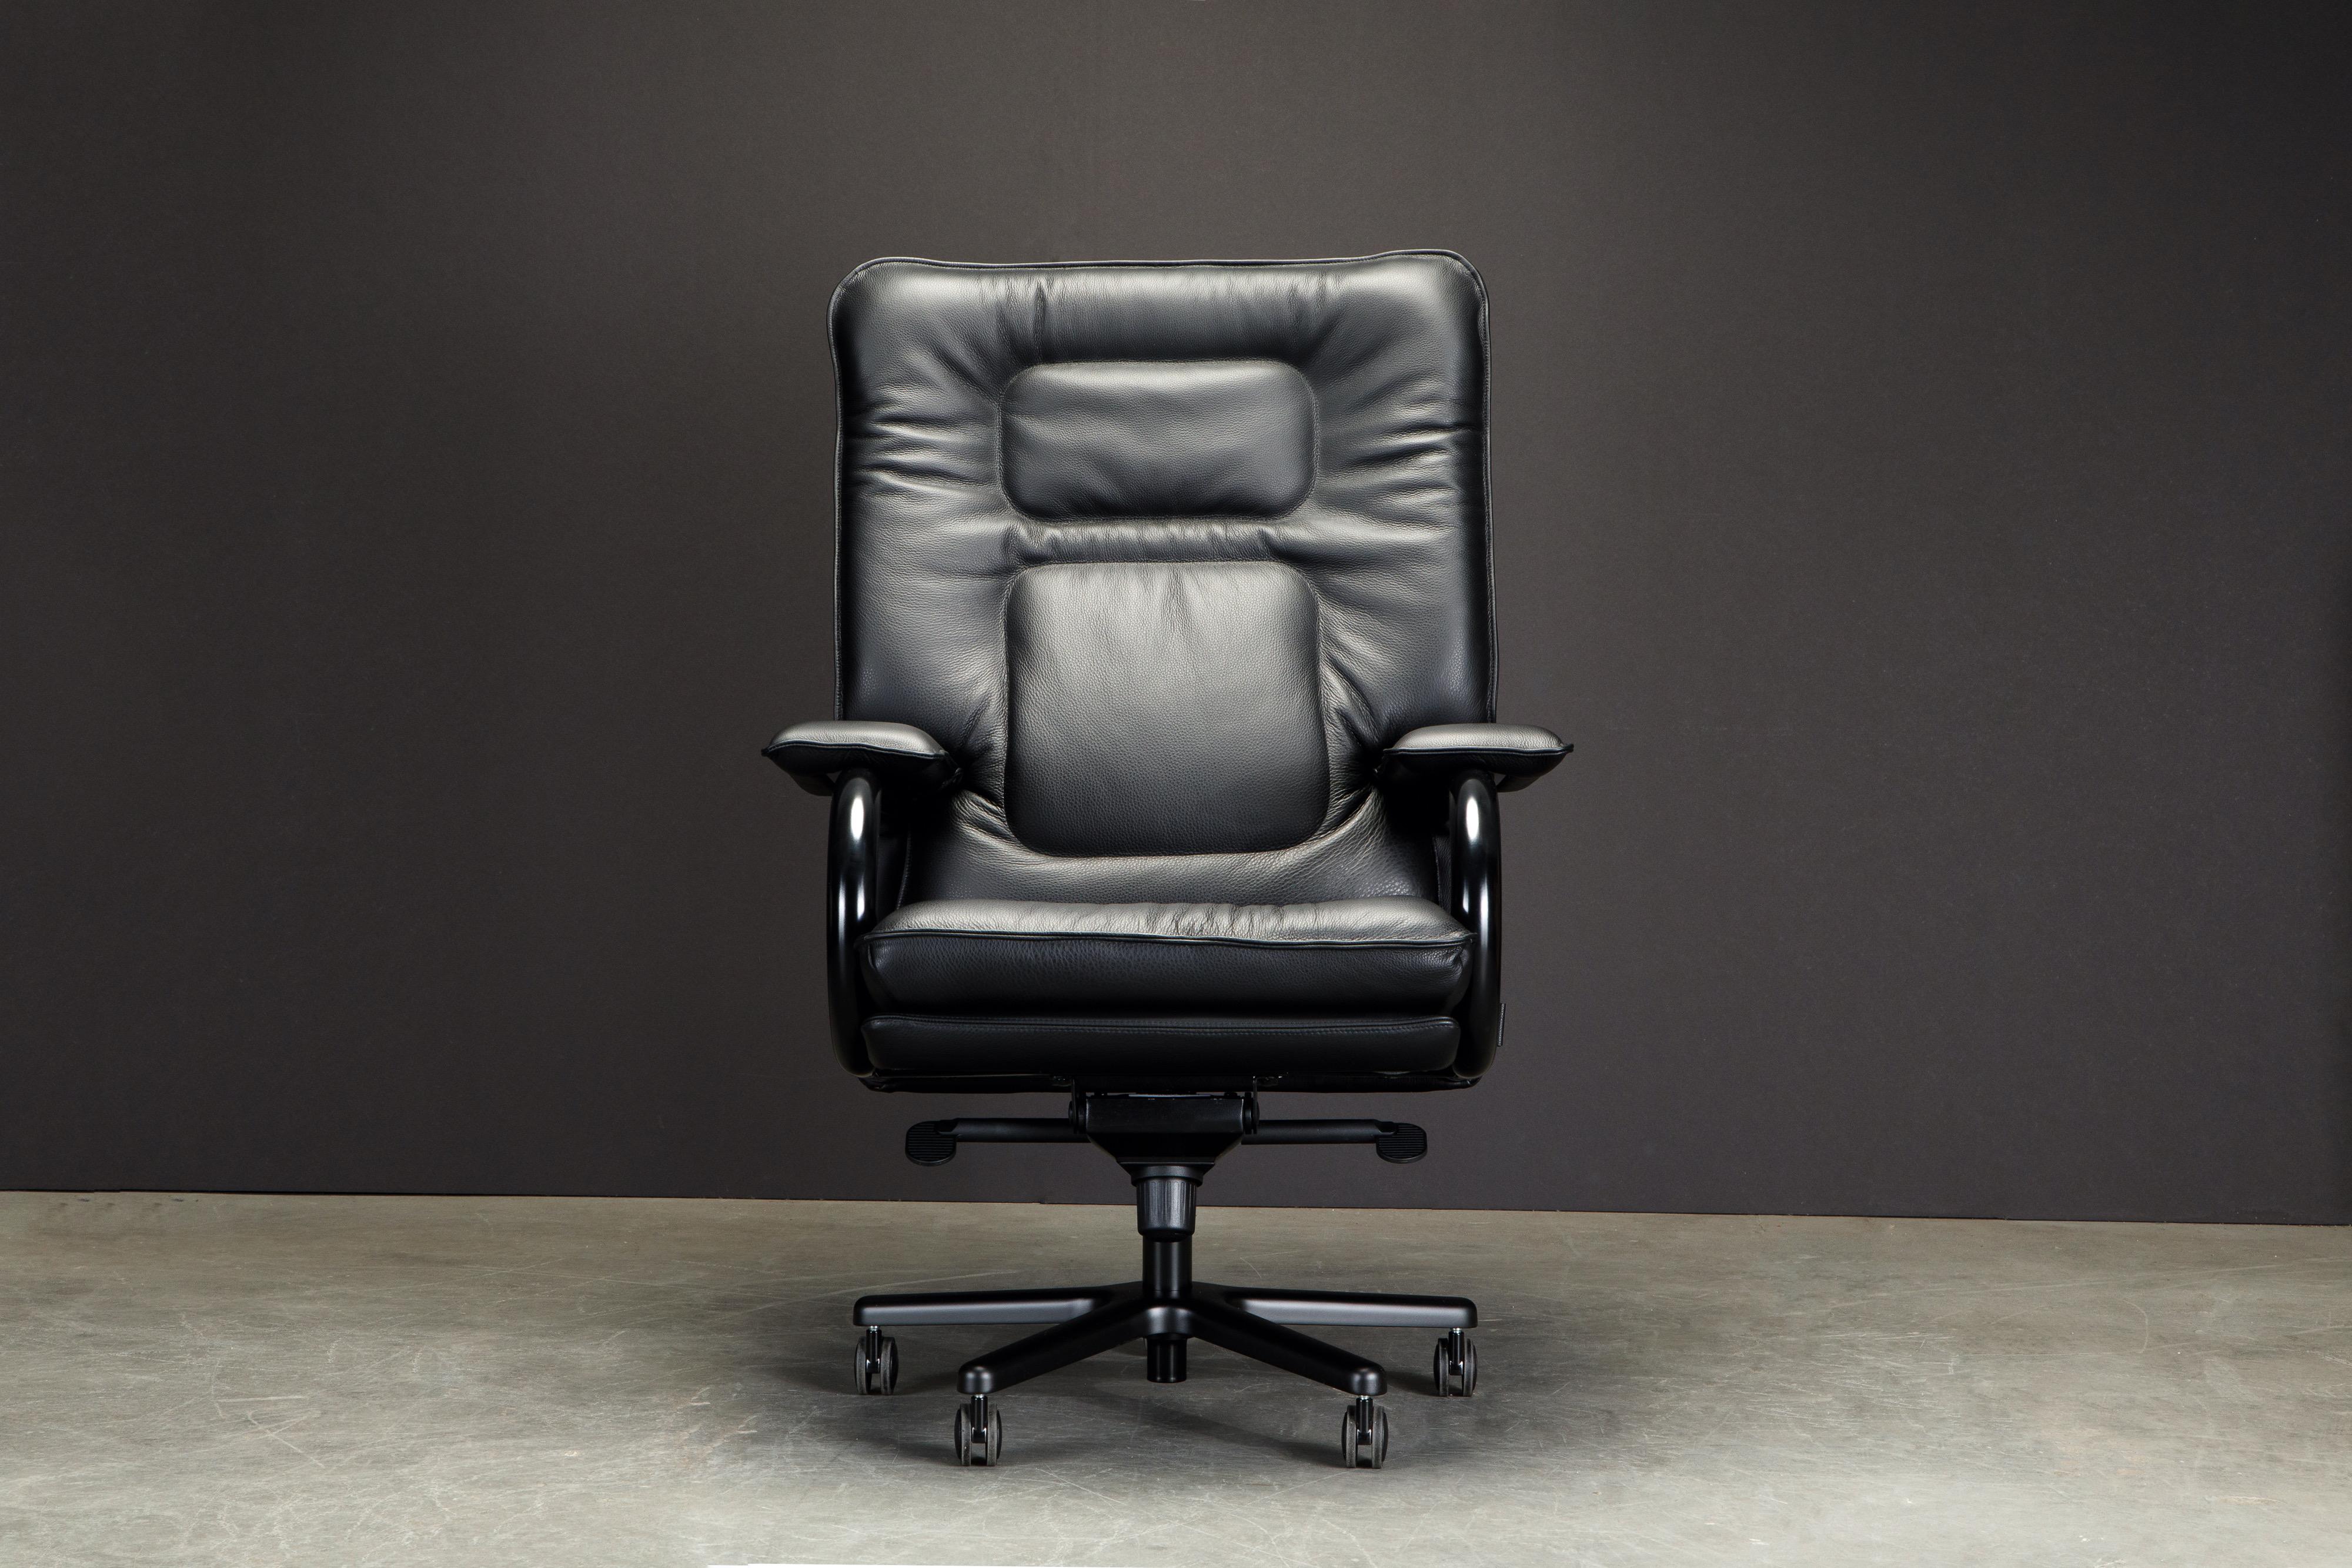 This incredible executives chair is named 'Big', designed by Guido Faleschini by i4 Mariani originally designed in the 1970s, this example newly produced in gorgeous black leather and matching color arms and base. 

Such incredible style, no wonder